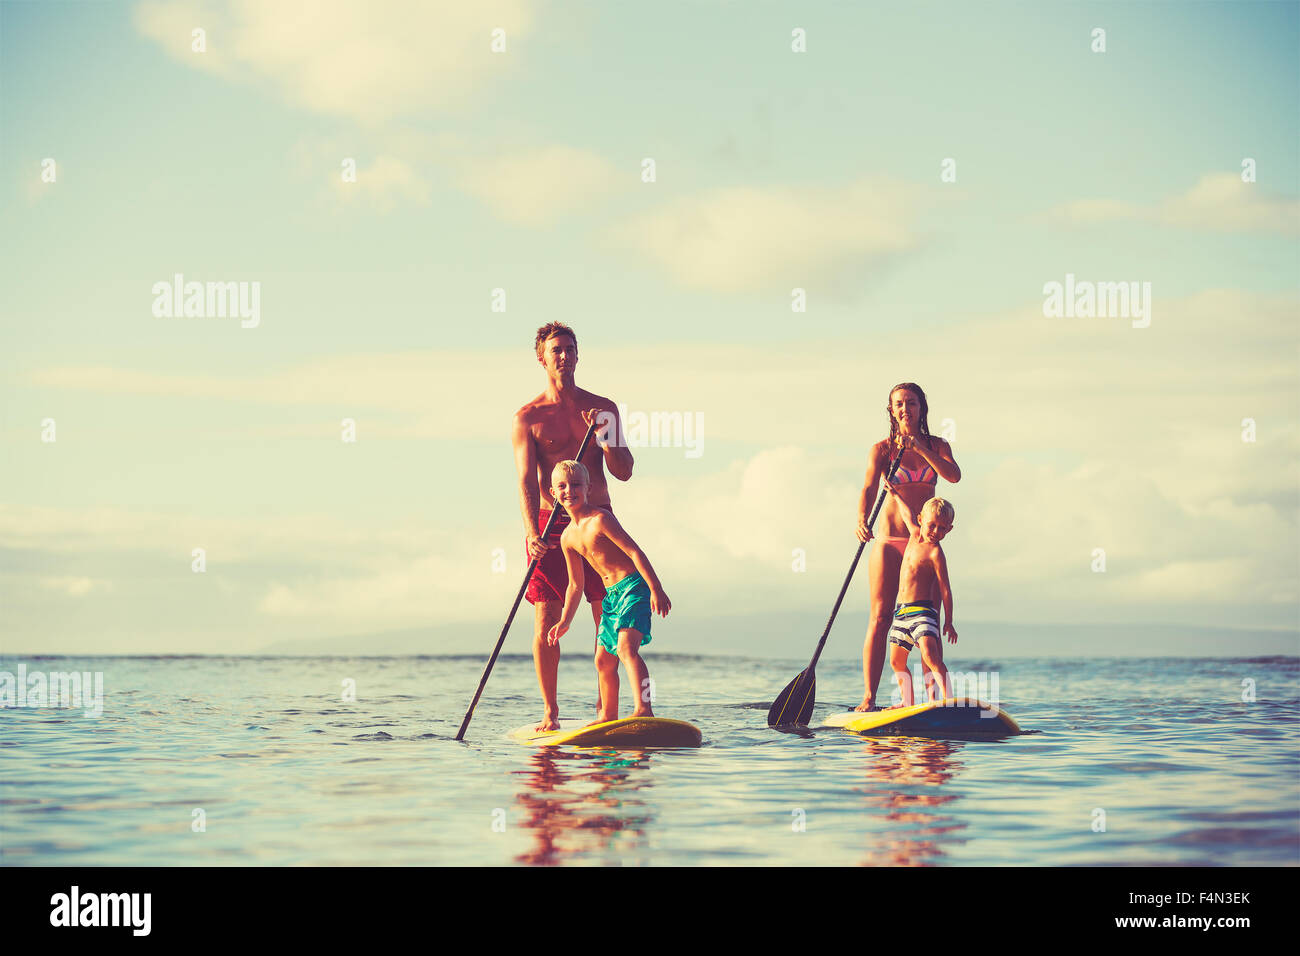 Family stand up paddling at sunrise, Summer fun outdoor lifestyle Stock Photo